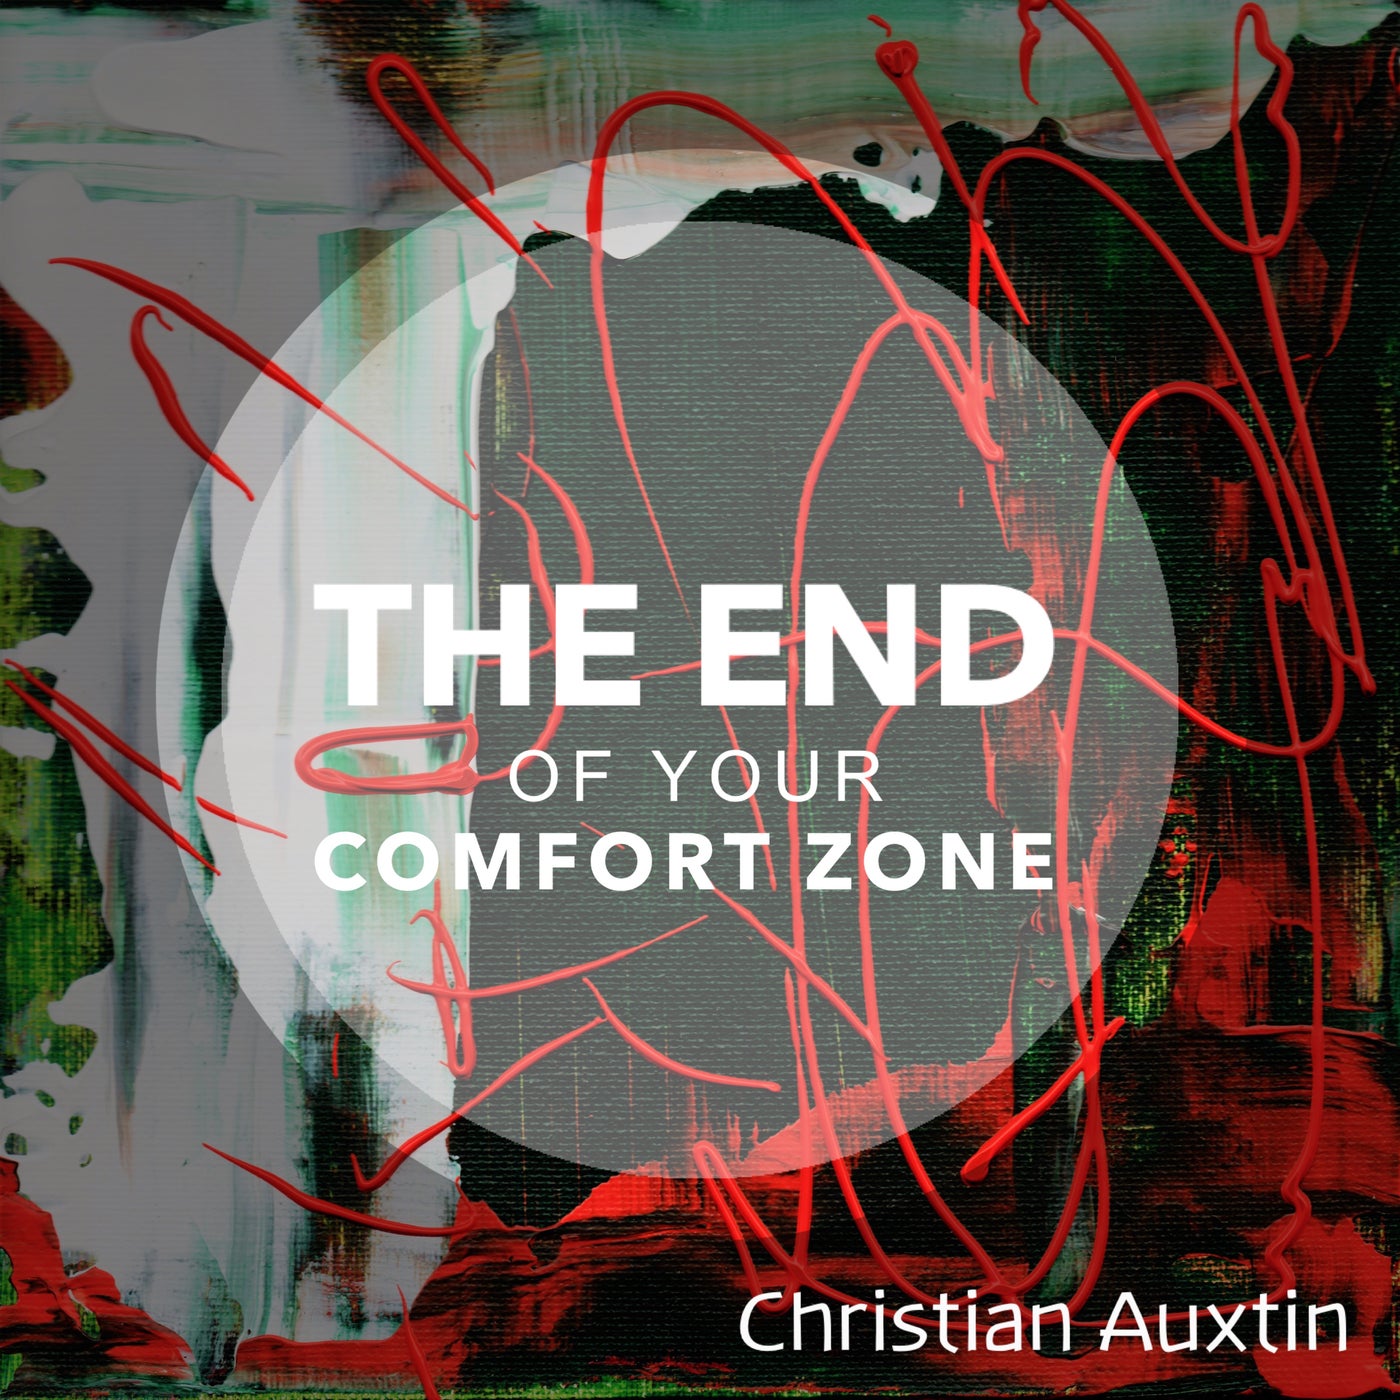 The End of your Comfort Zone